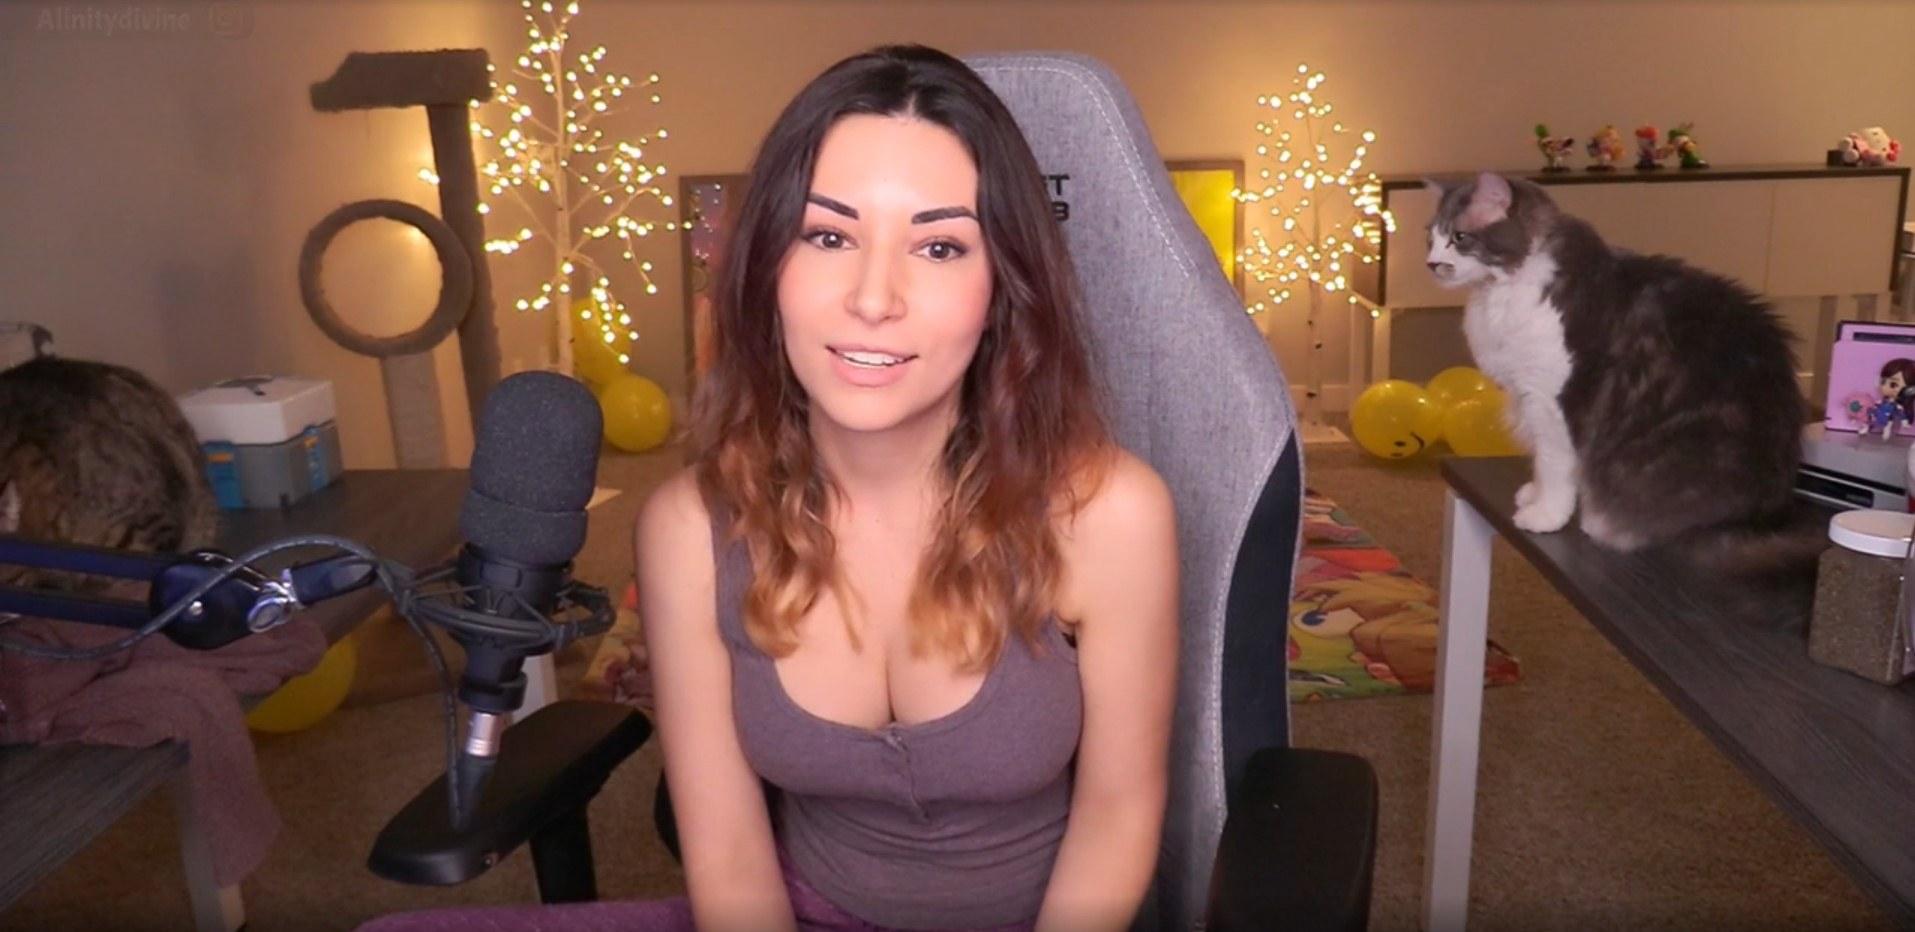 Alinity streaming on Twitch.tv.